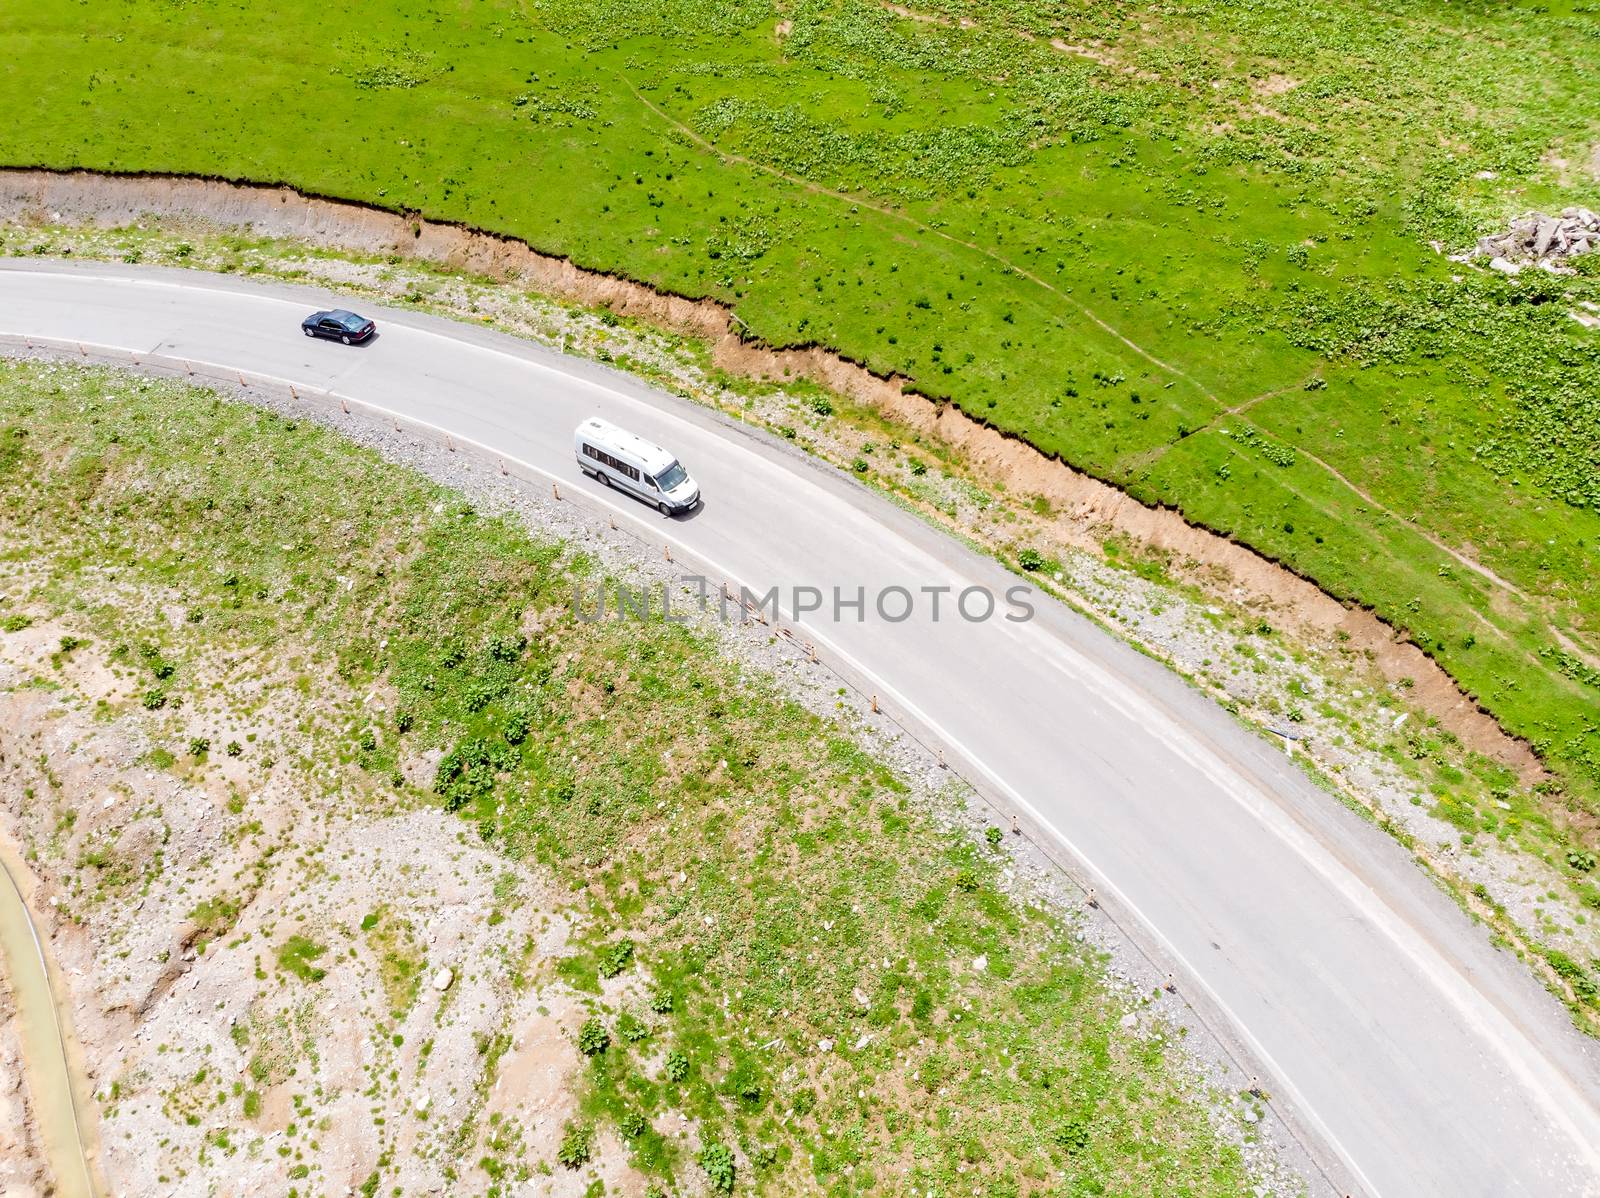 Top view of the road serpentine in the mountains, on the road cars